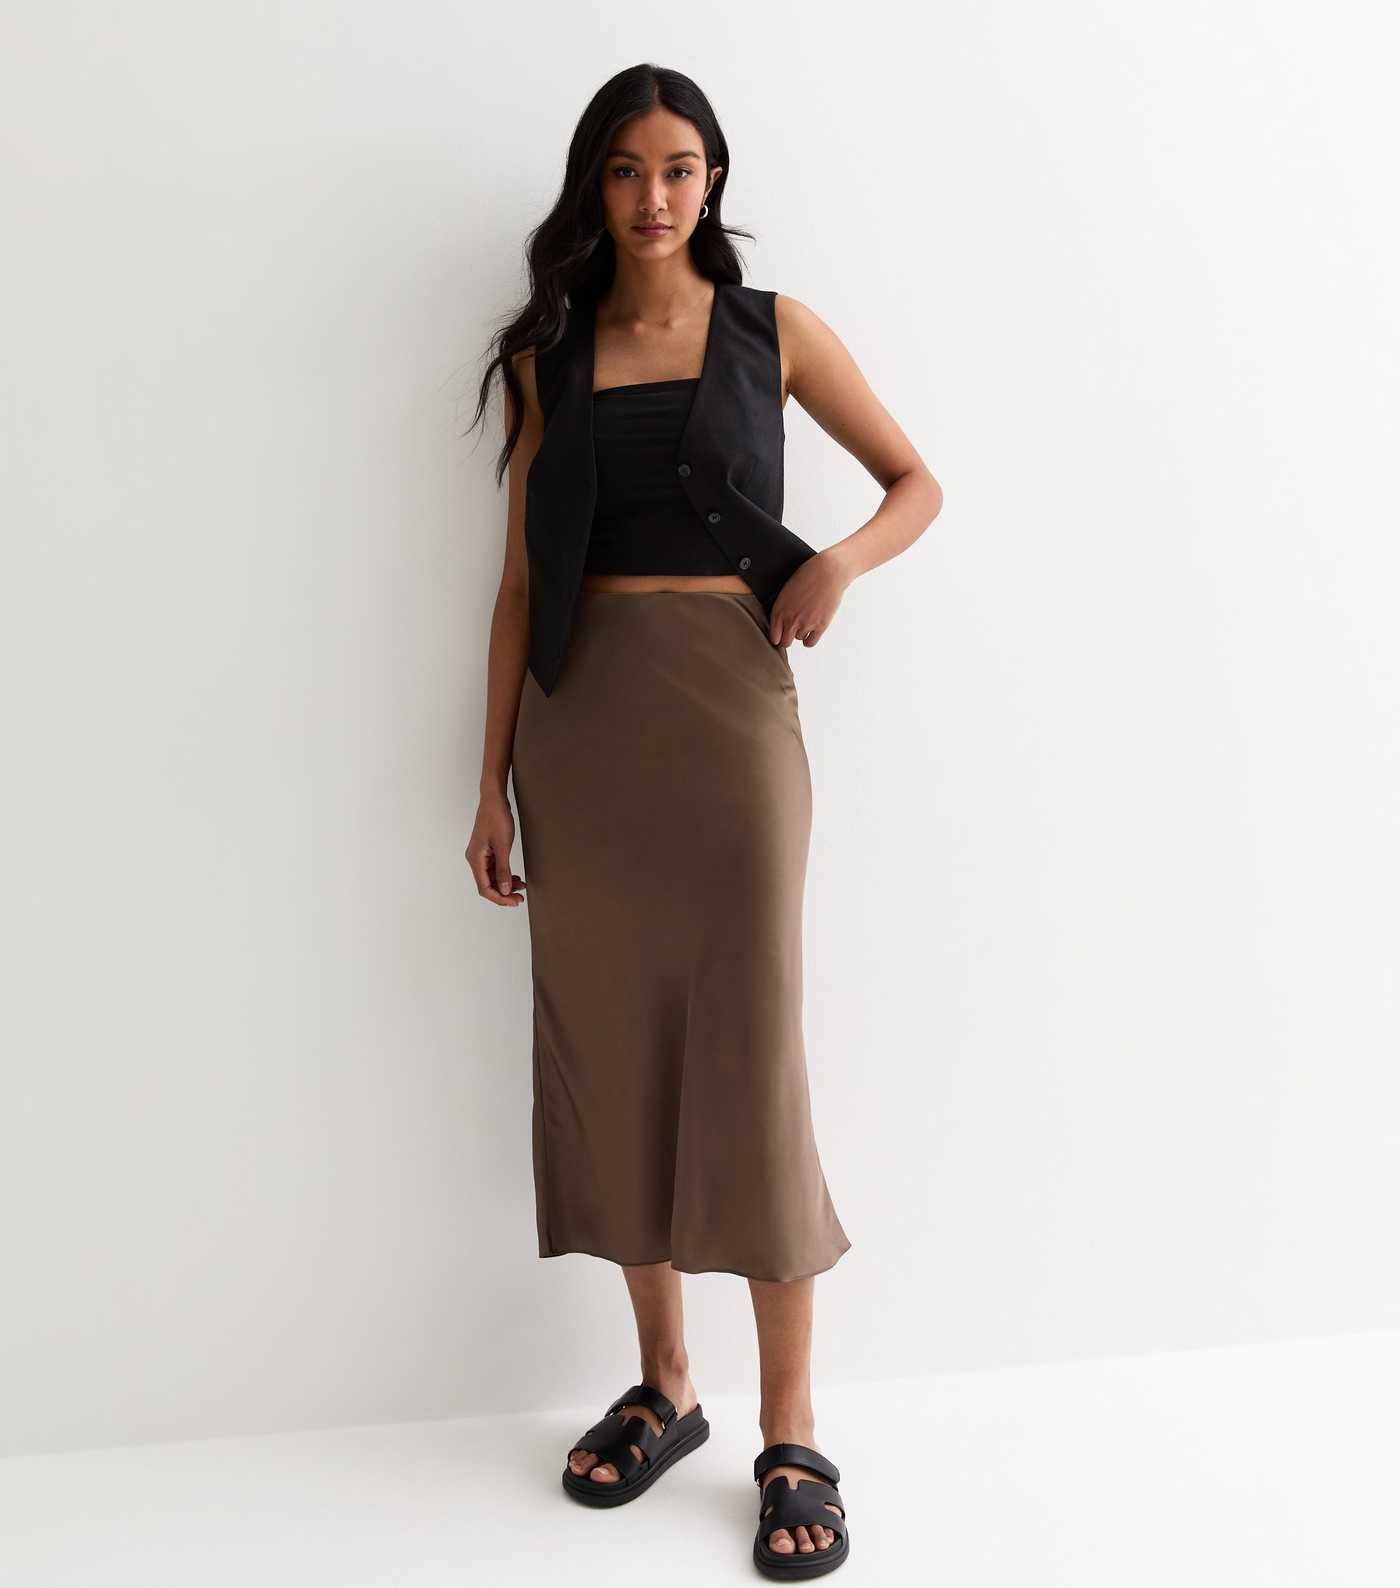 Mink Satin Midi Skirt
						
						Add to Saved Items
						Remove from Saved Items | New Look (UK)